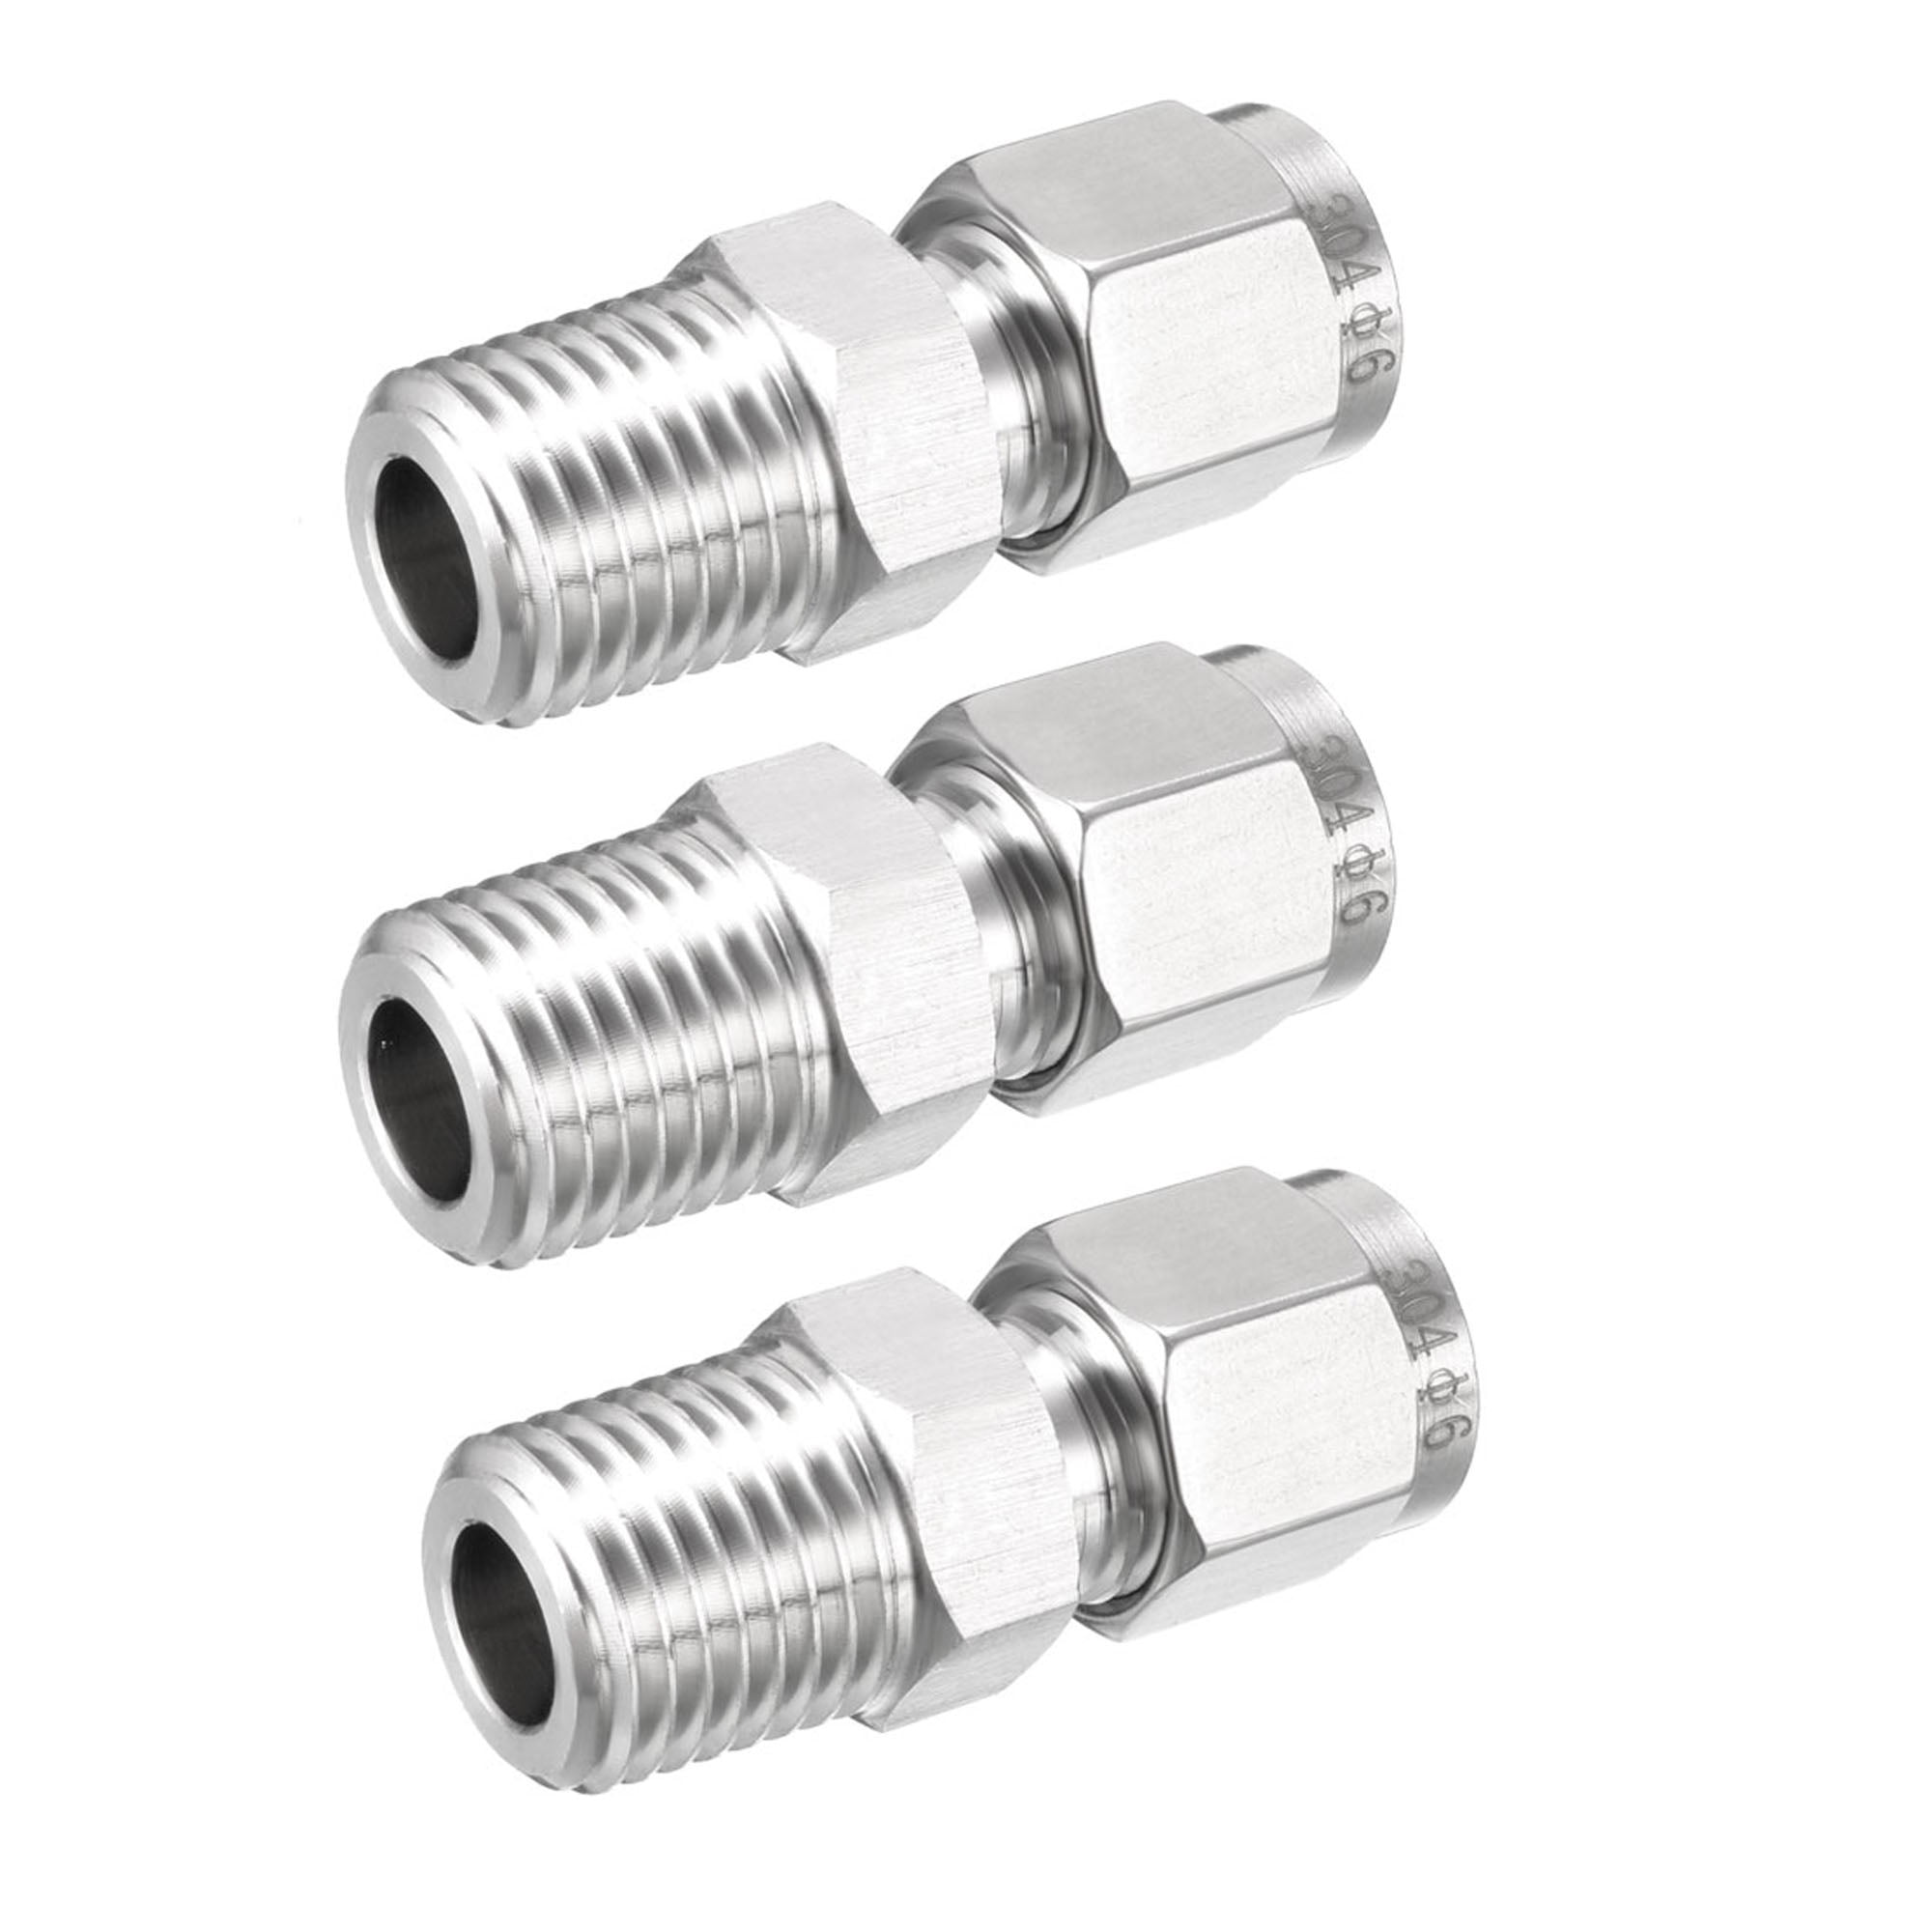 Compression Tube Fitting, Connector Adapter 1/4 NPT Male x Ф6 Tube